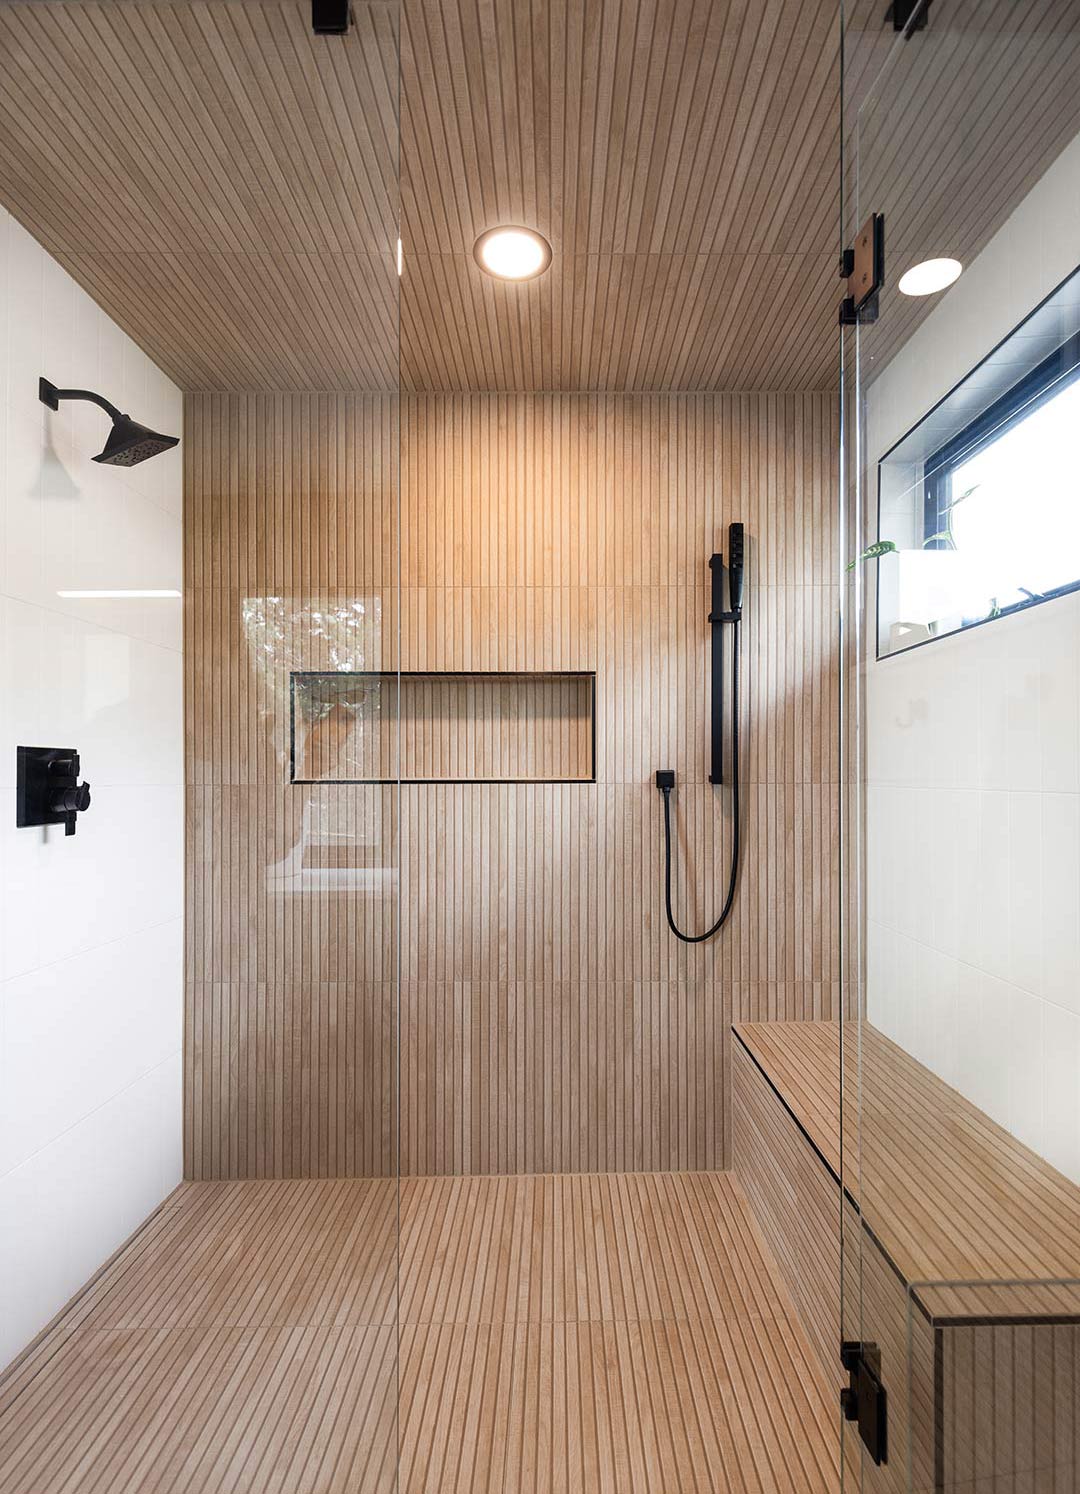 Custom tiled luxury walk-in shower with wood-slat-look tile, a built-in bench, recessed can light, and matte black fixtures designed and installed by Freestone Design-Build